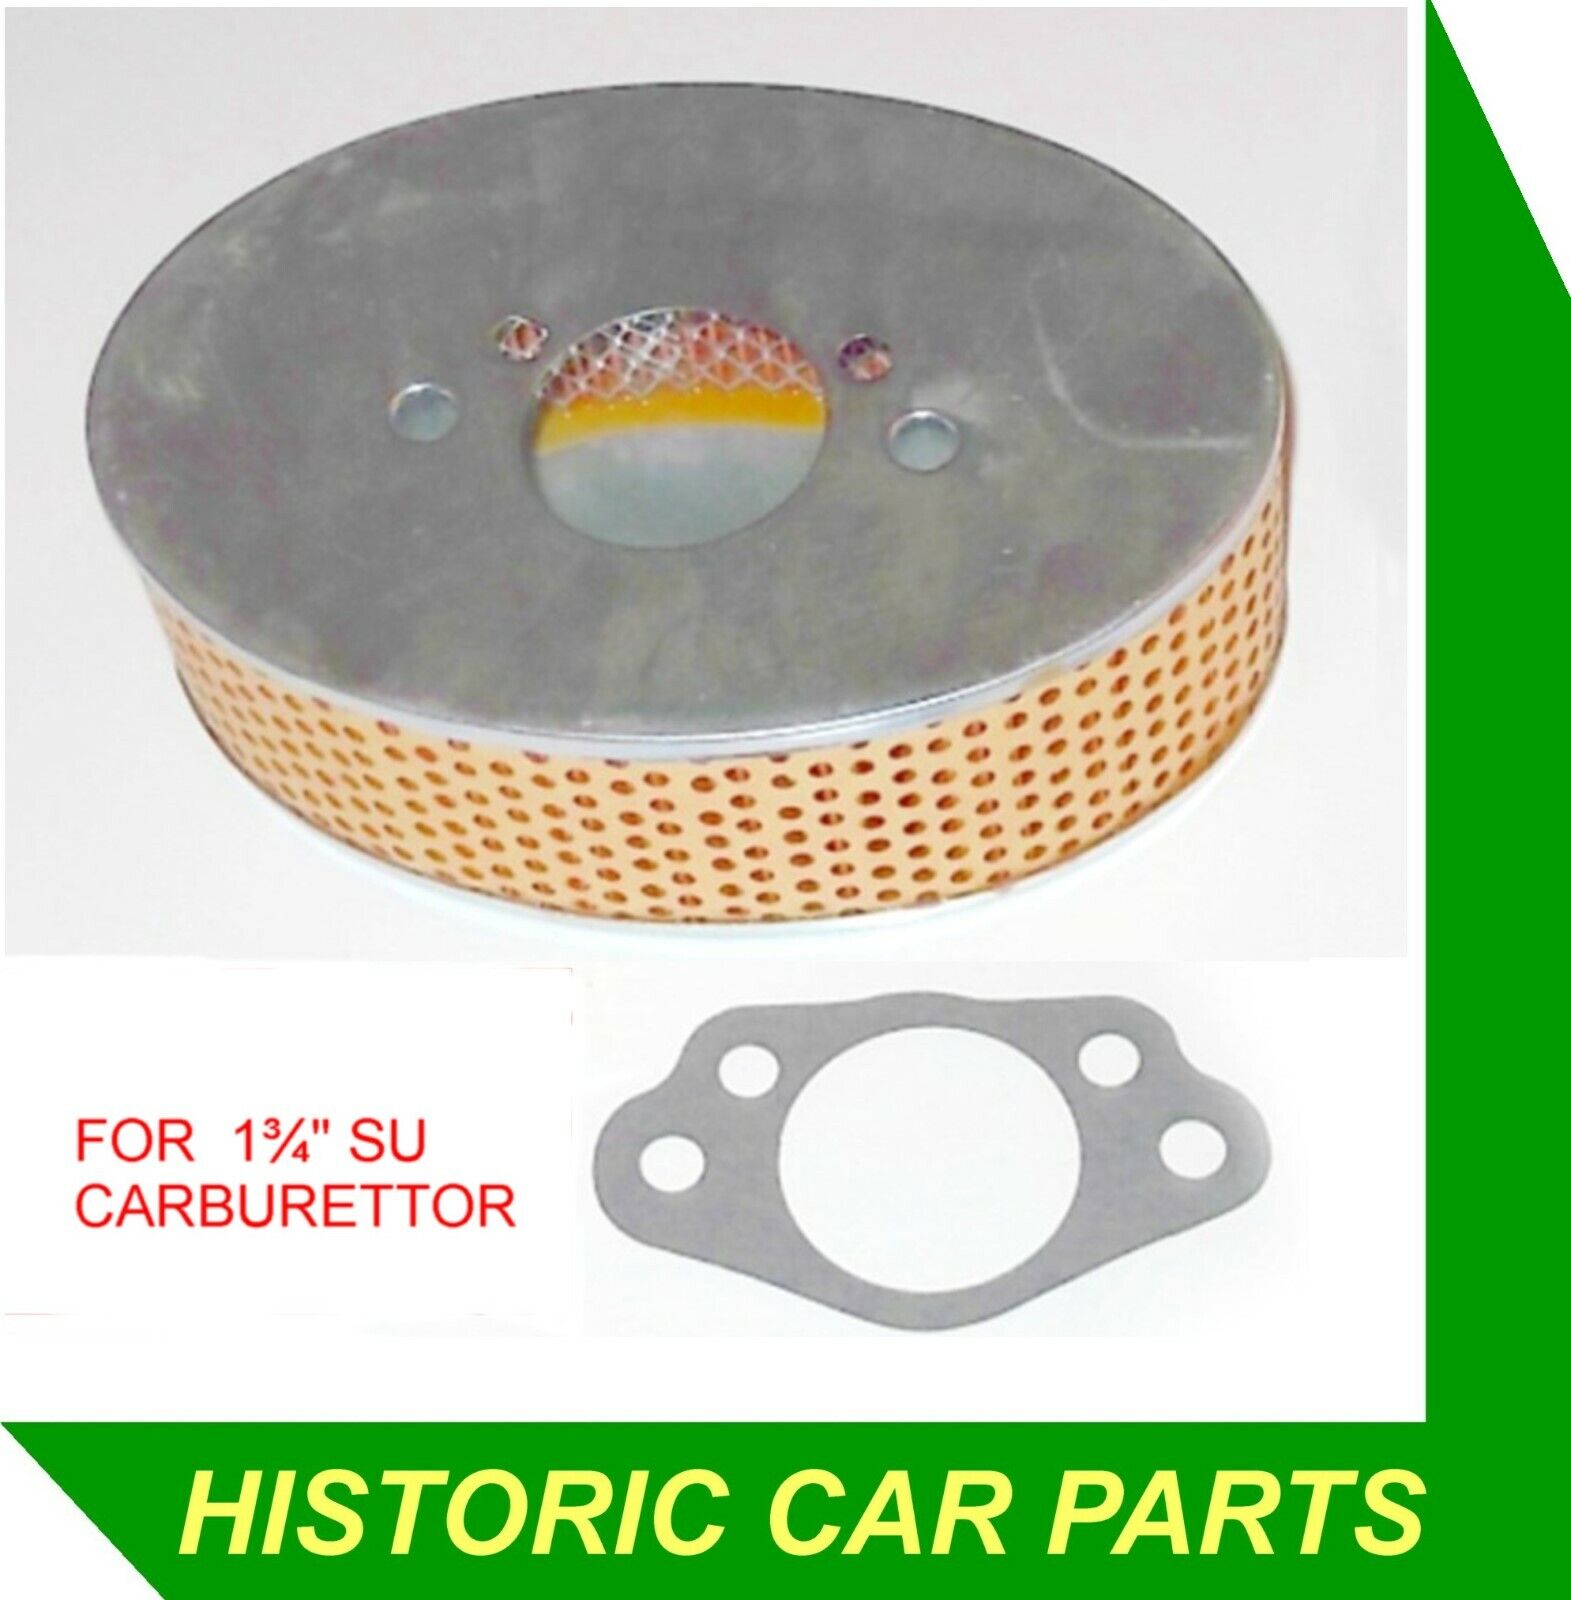 1 AIR FILTER & GASKET for 1¾” SU HS6 Carburettors on Triumph TR4A 2138 1965-67